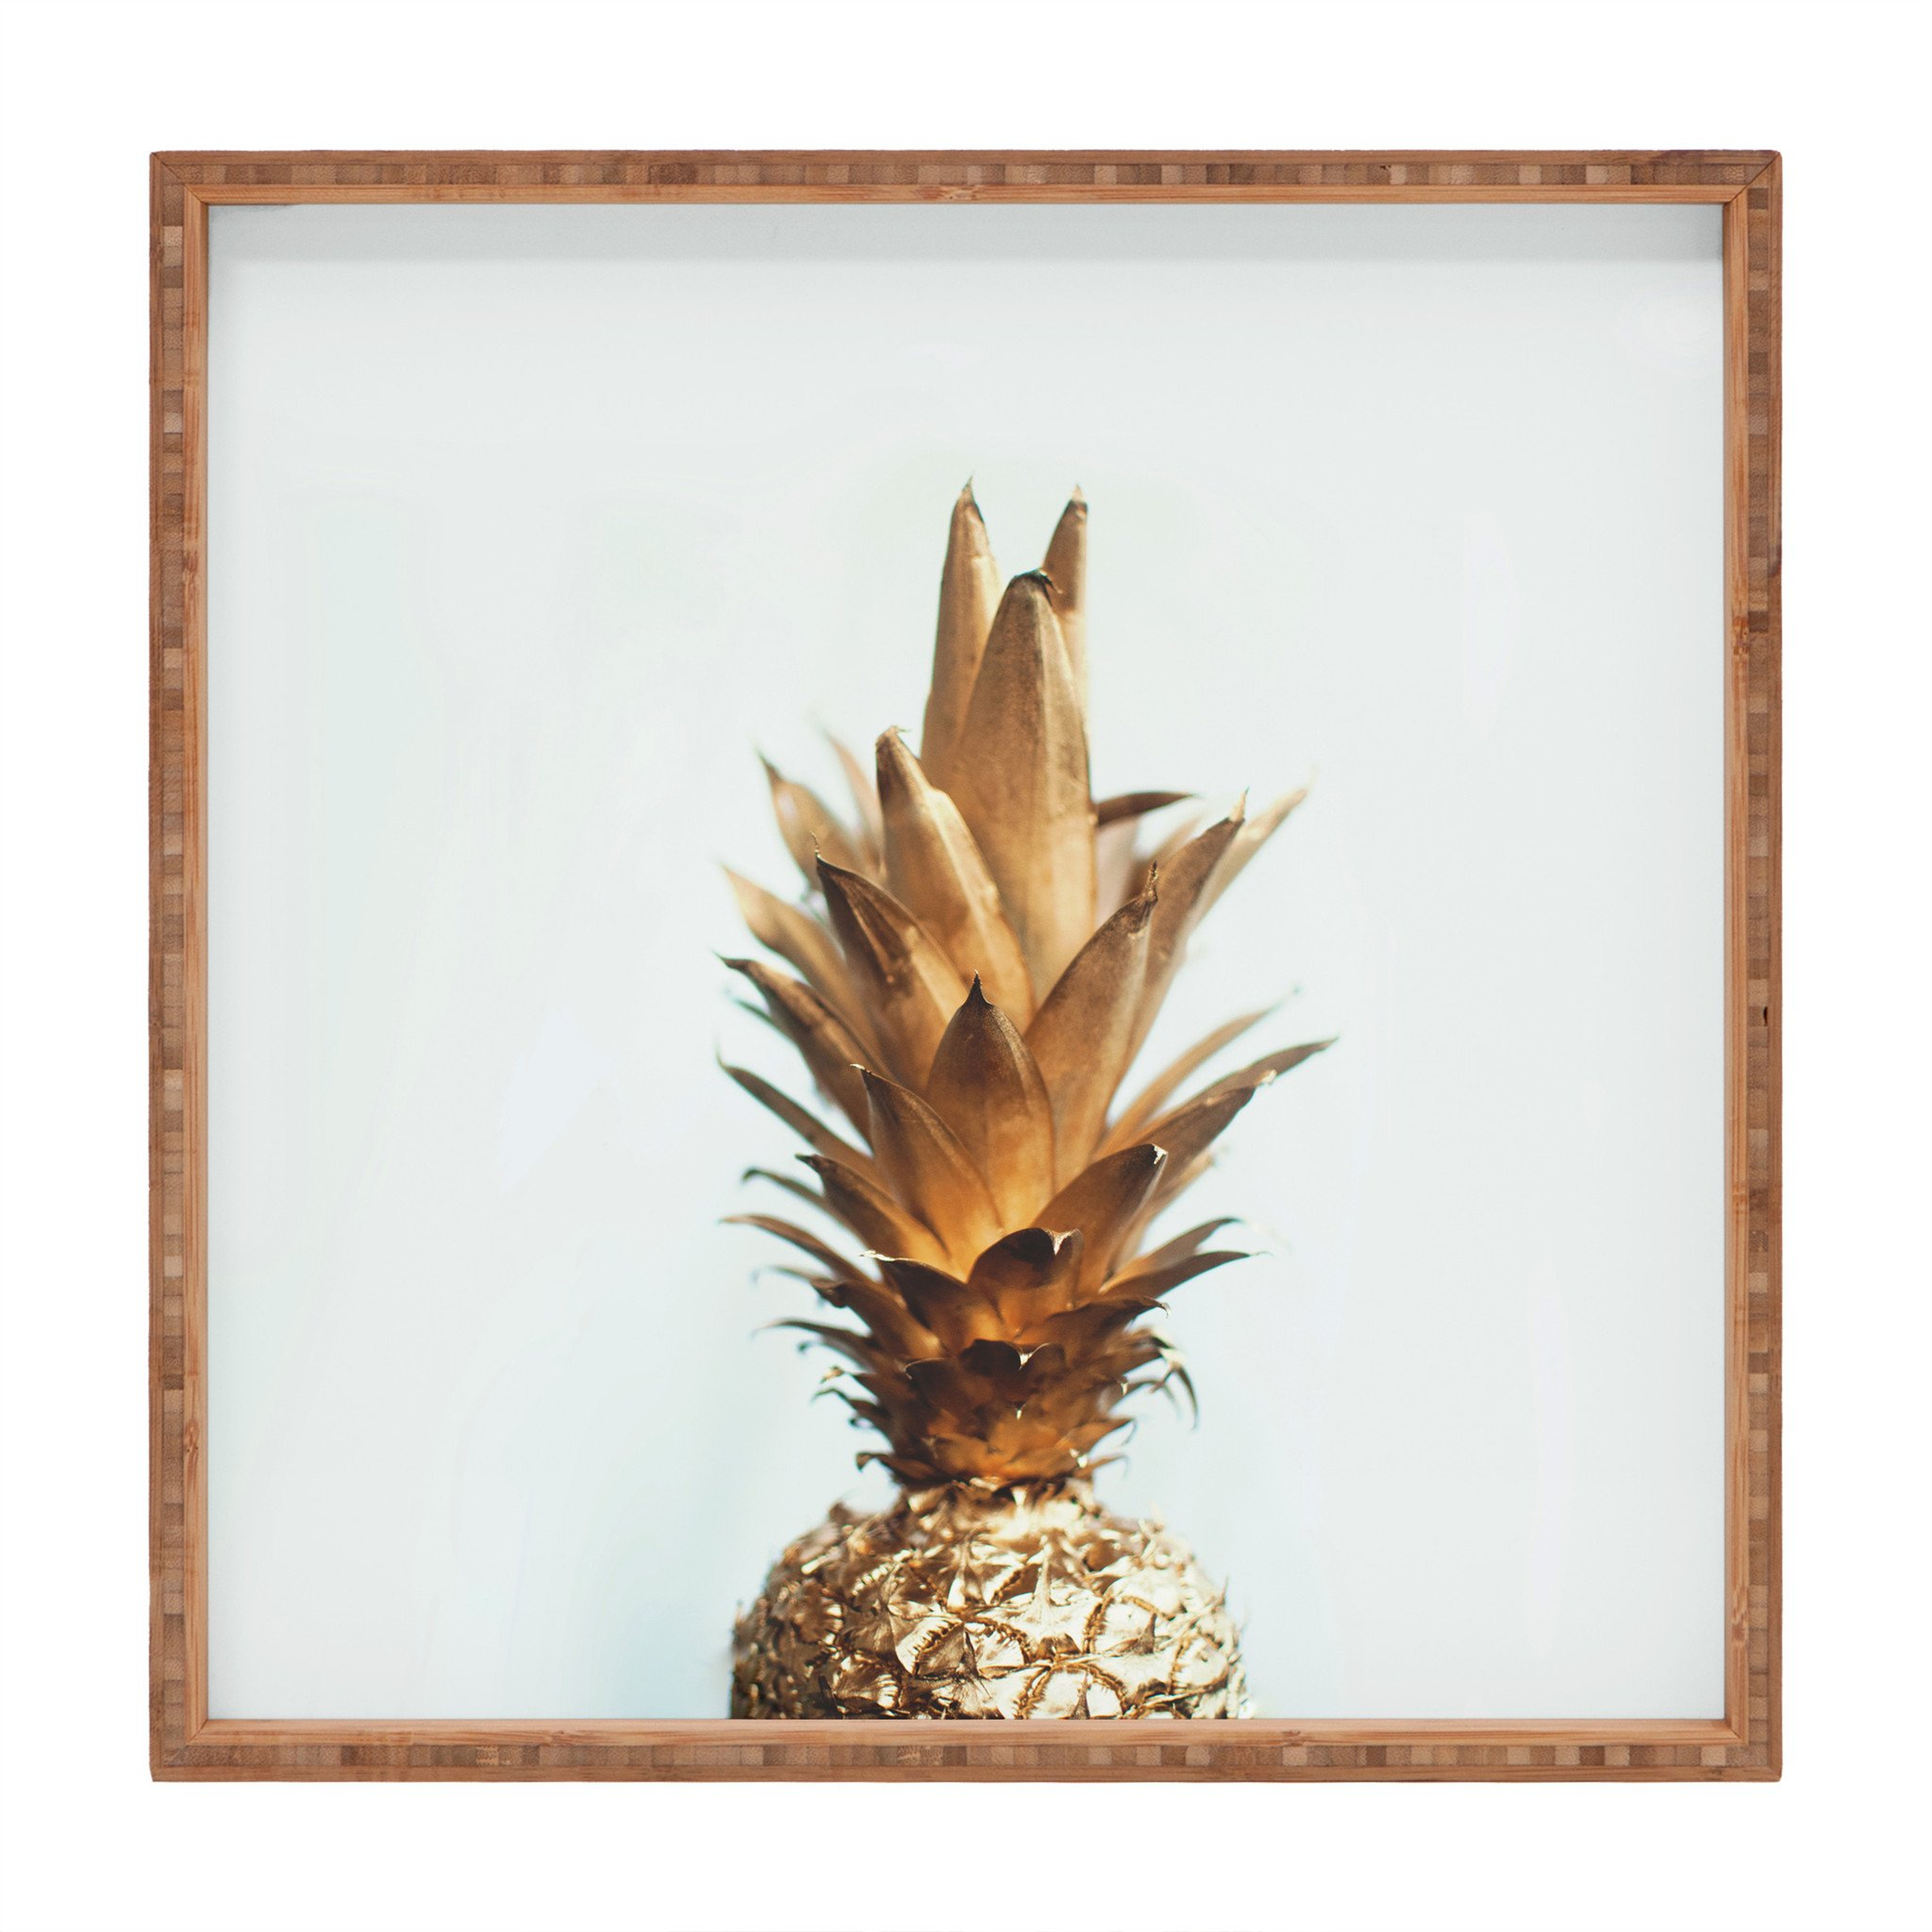 Chelsea Victoria The Gold Pineapple Square Tray - M - Wander Print Co.